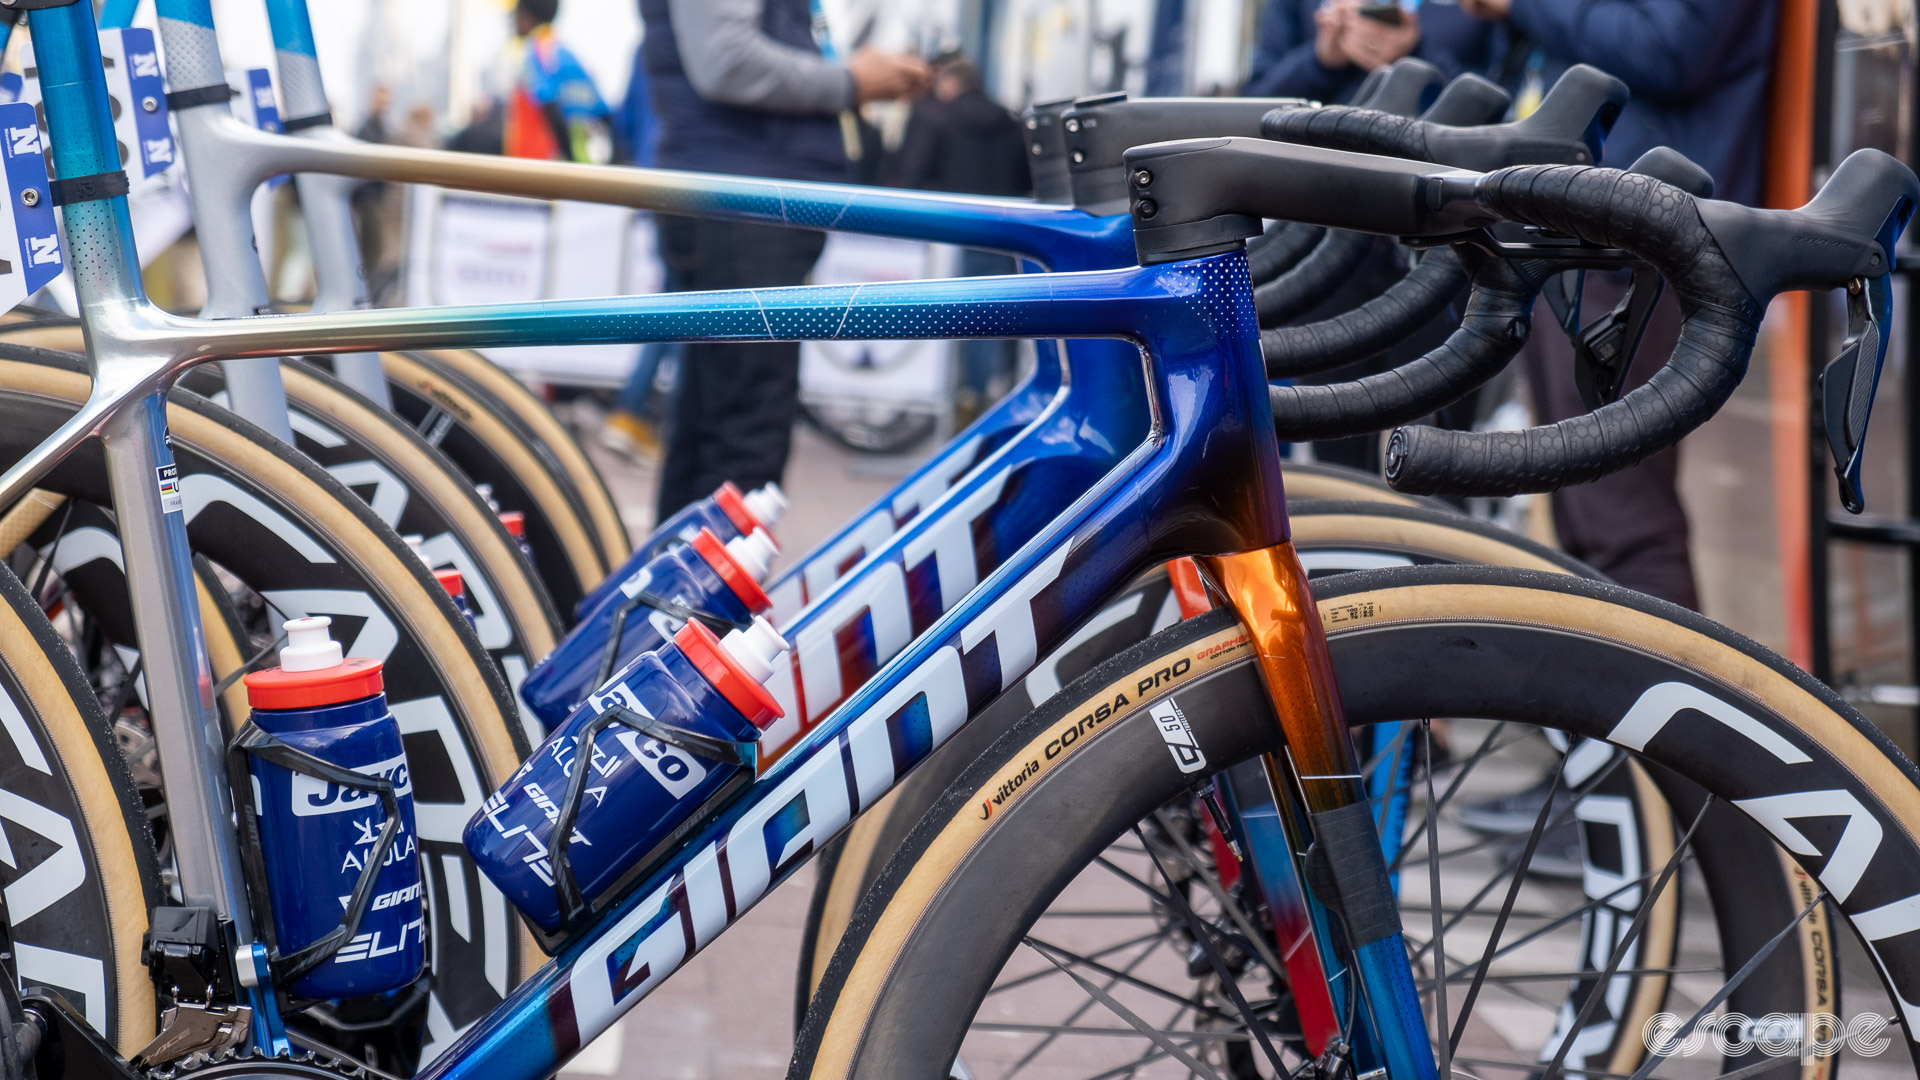 The image shows the new Giant TCR with Giant Propel frames in the background. 